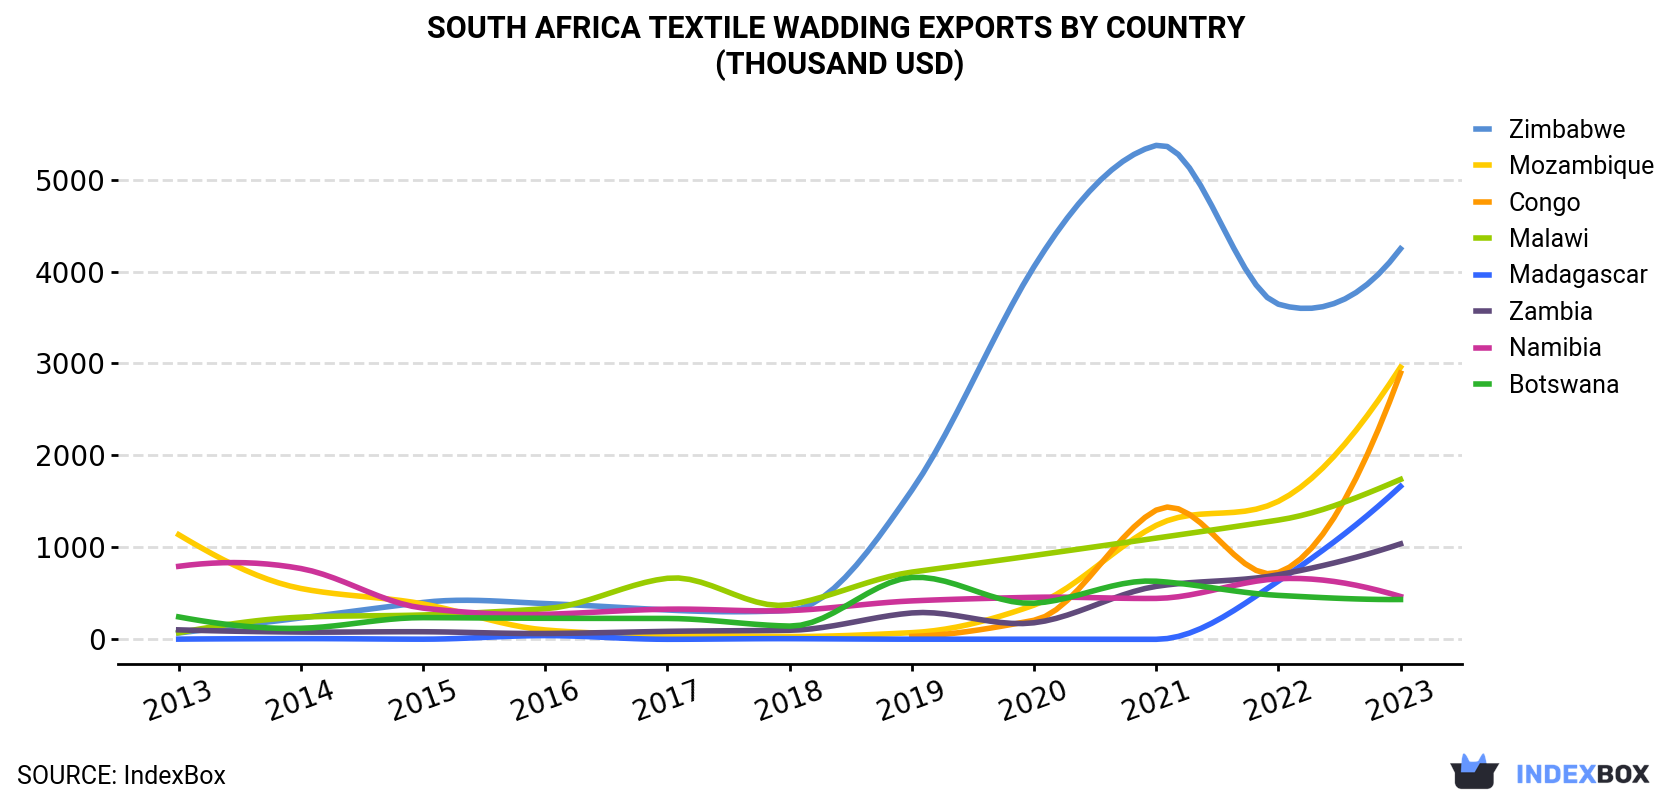 South Africa Textile Wadding Exports By Country (Thousand USD)